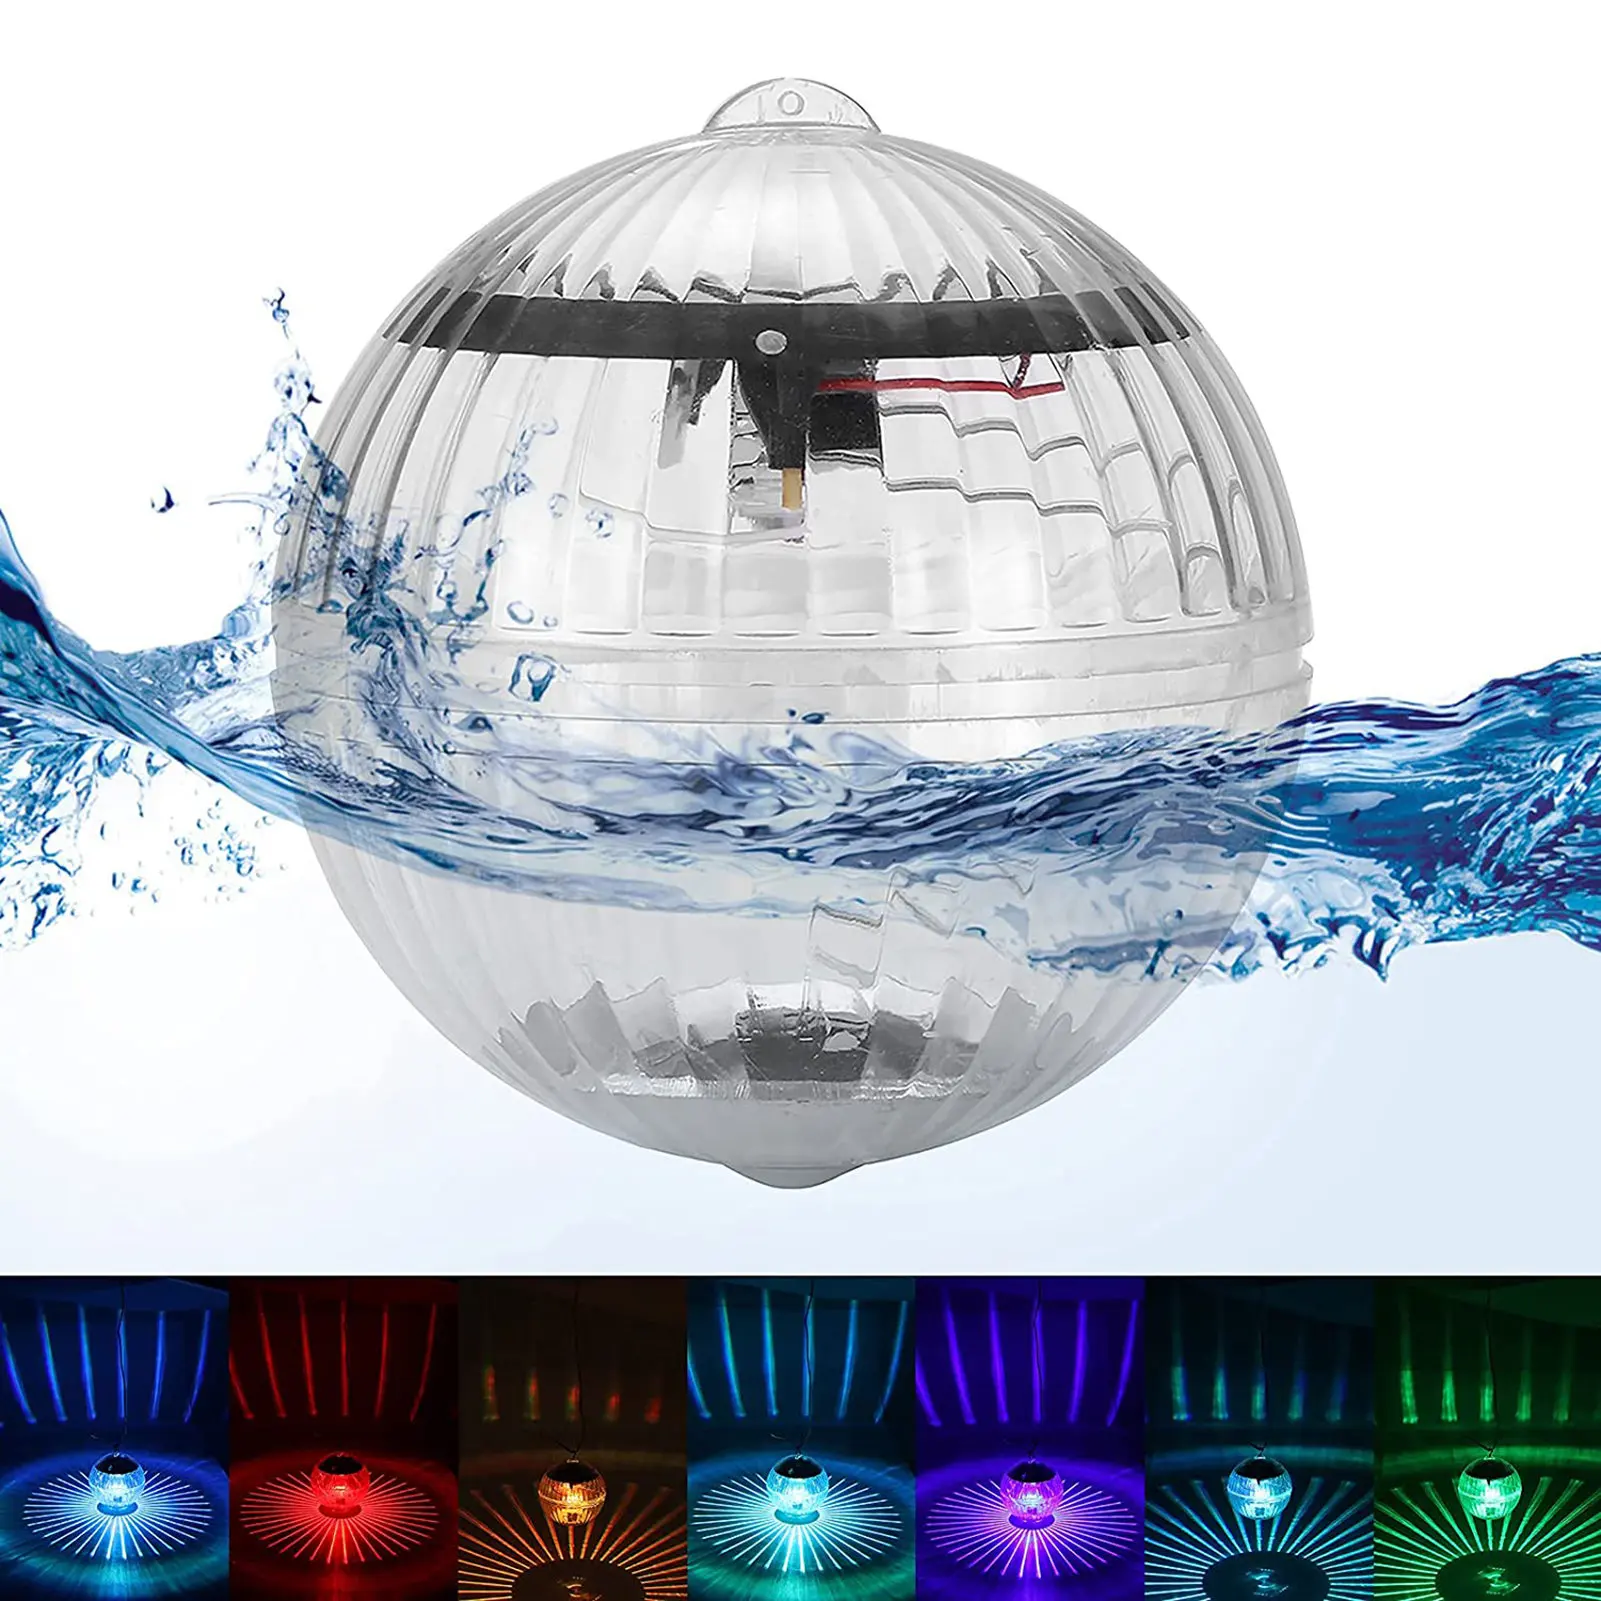 Underwater Ball Lamp Outdoor Floating Solar Powered Color Changing Night... - $171.91